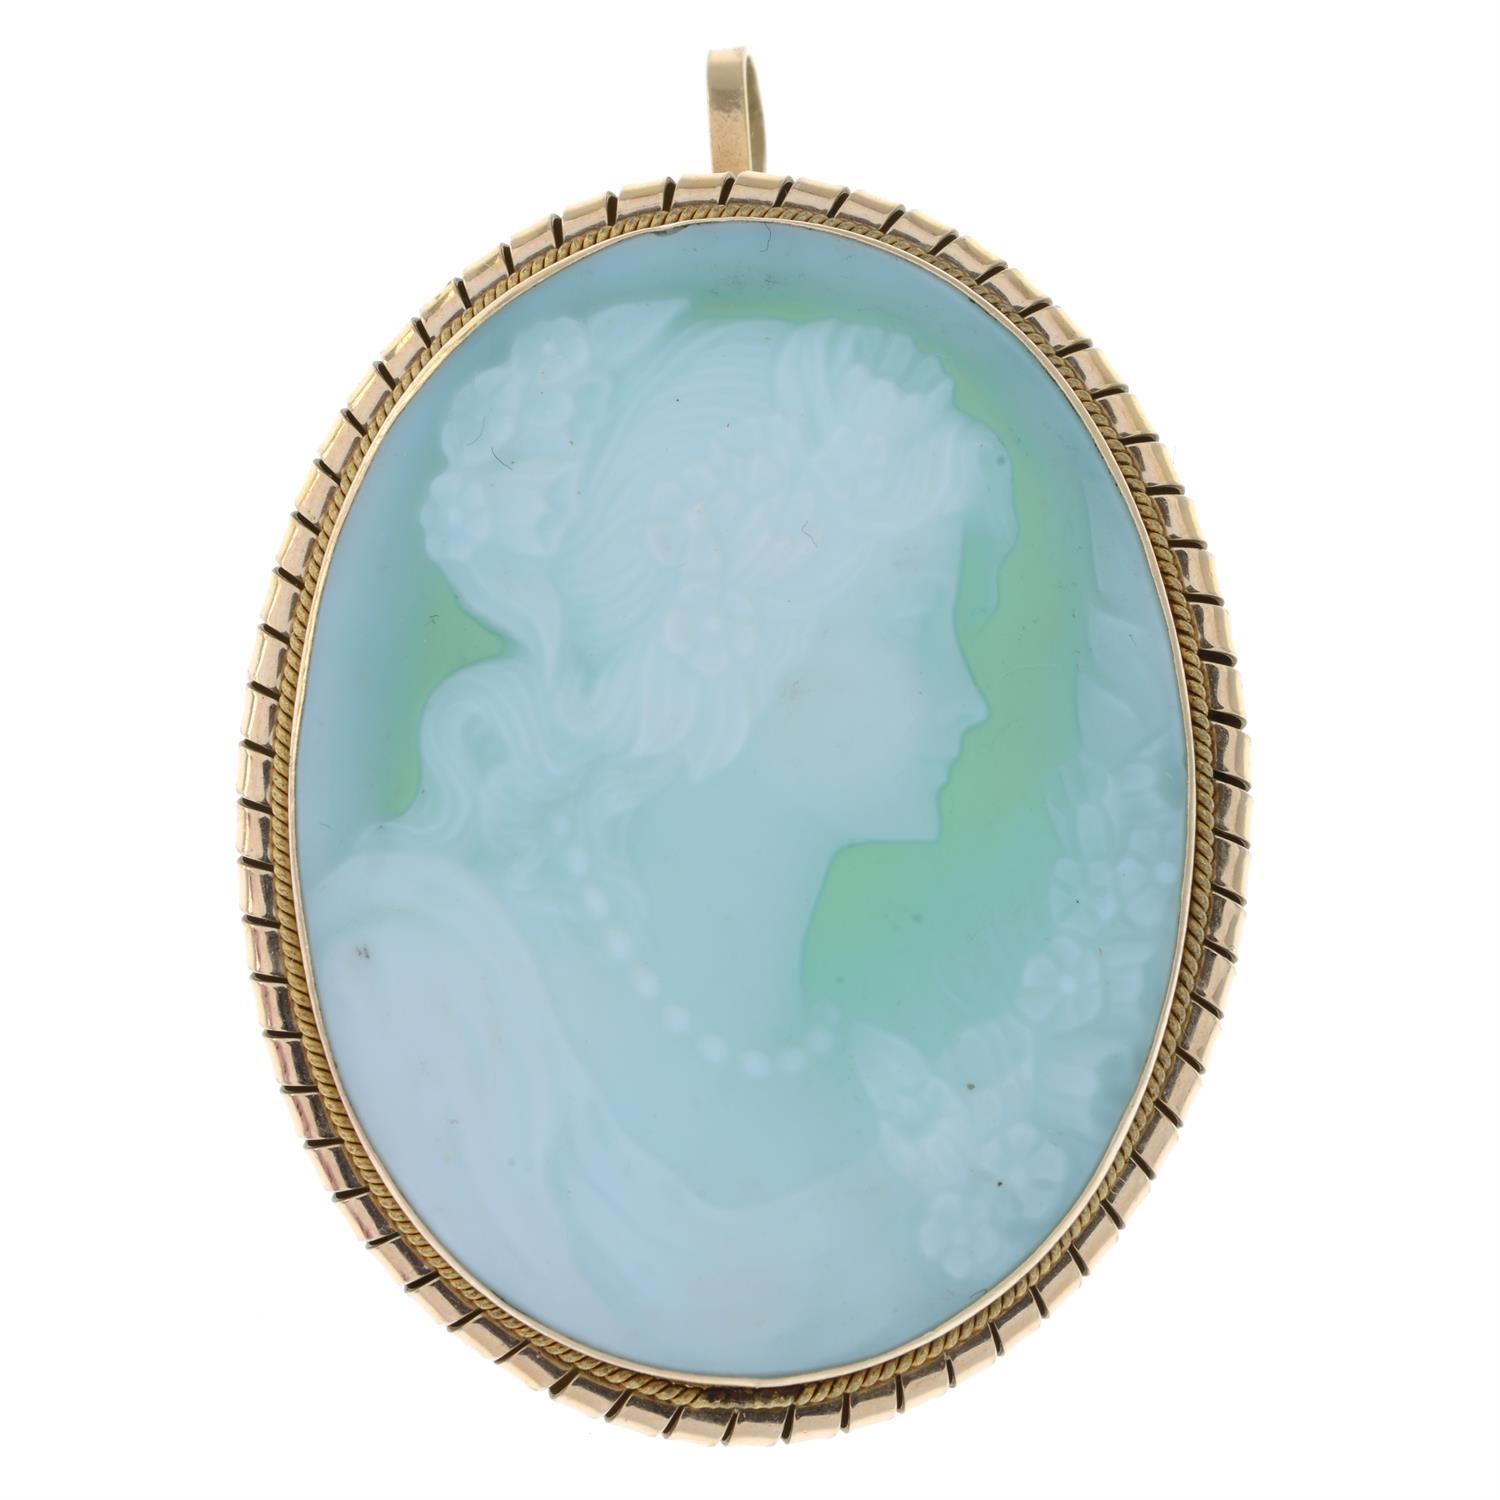 Banded agate cameo brooch/pendant